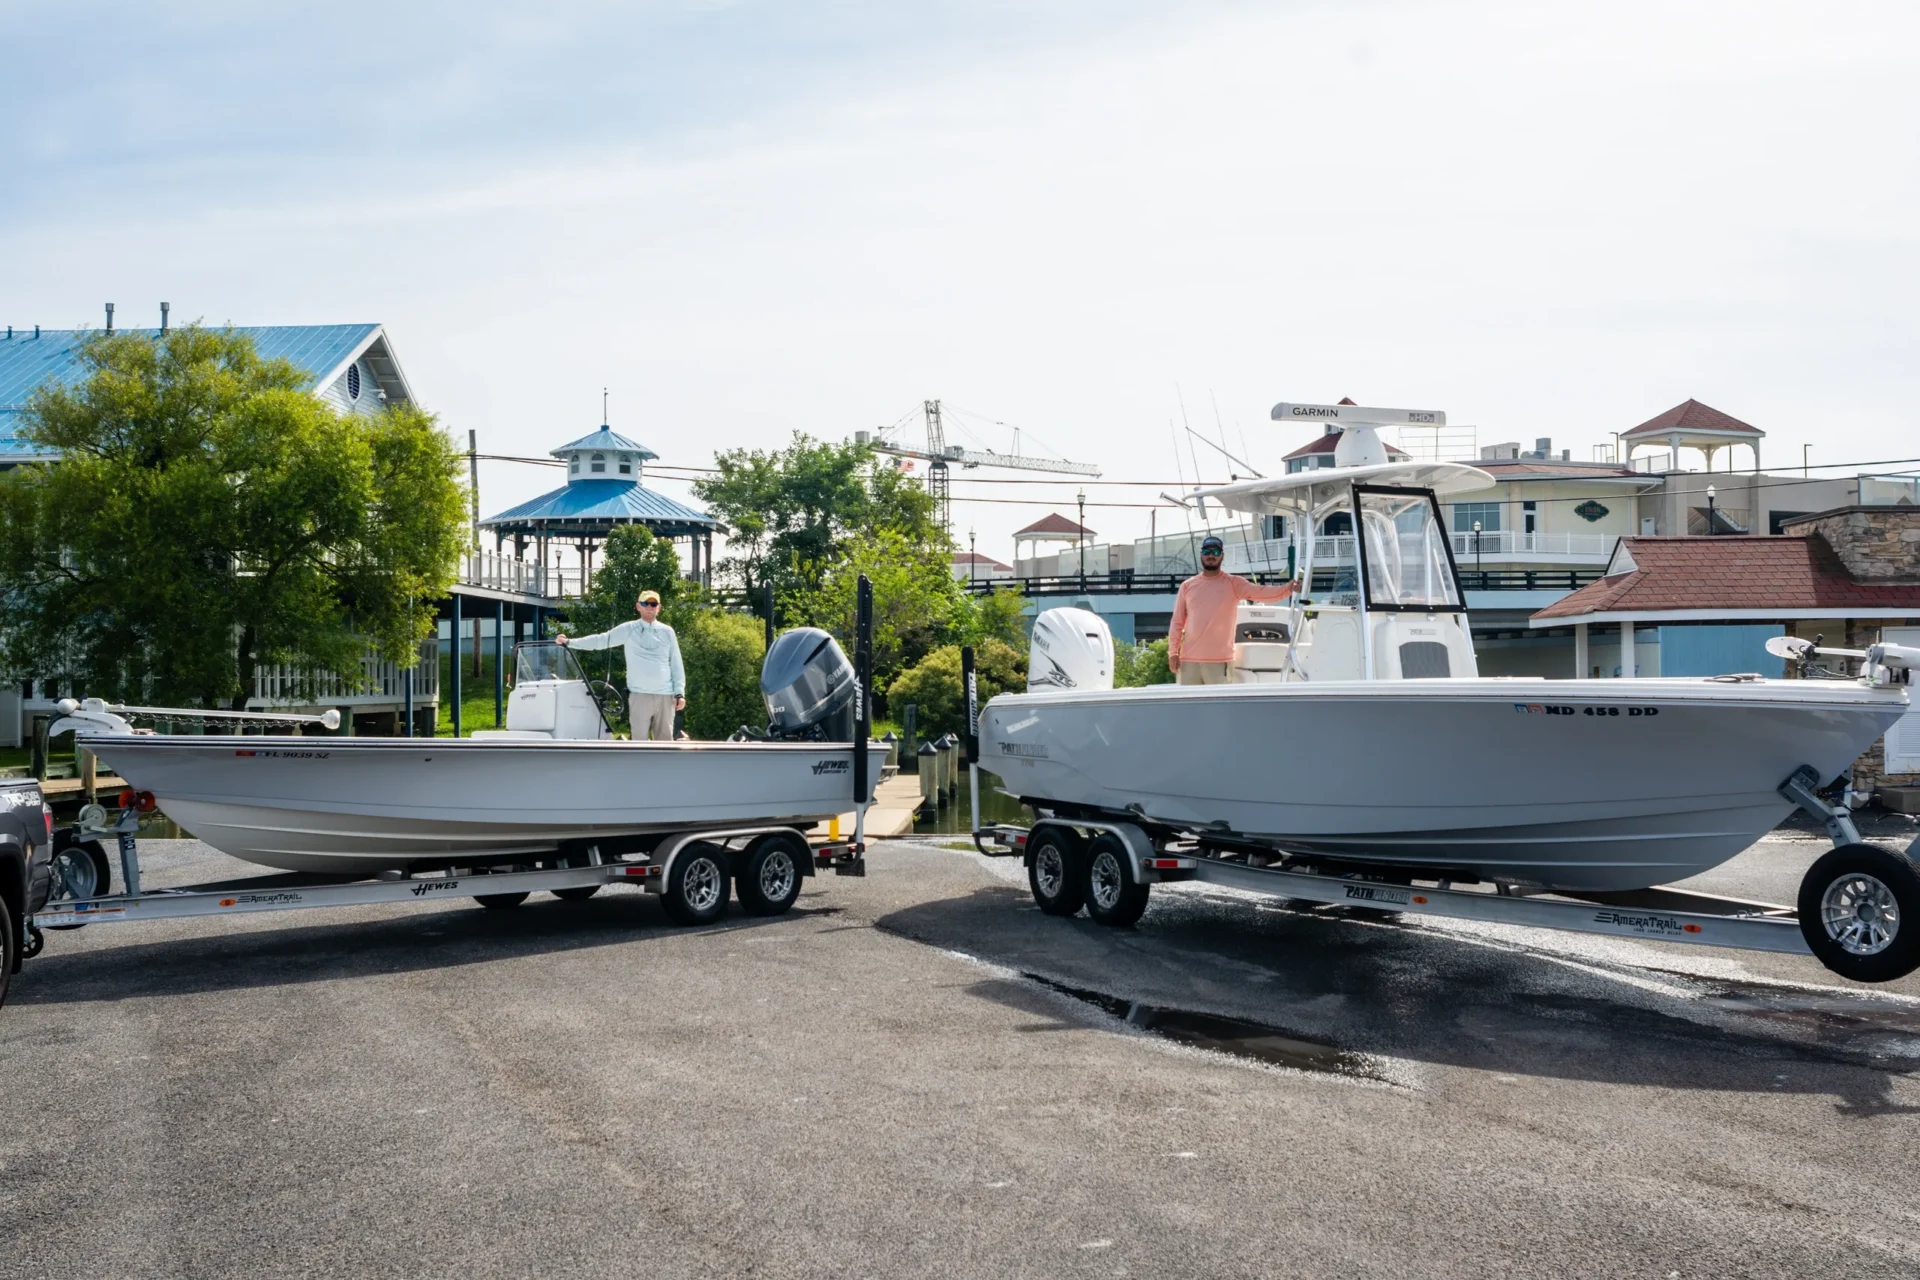 Two boats are parked in a parking lot.